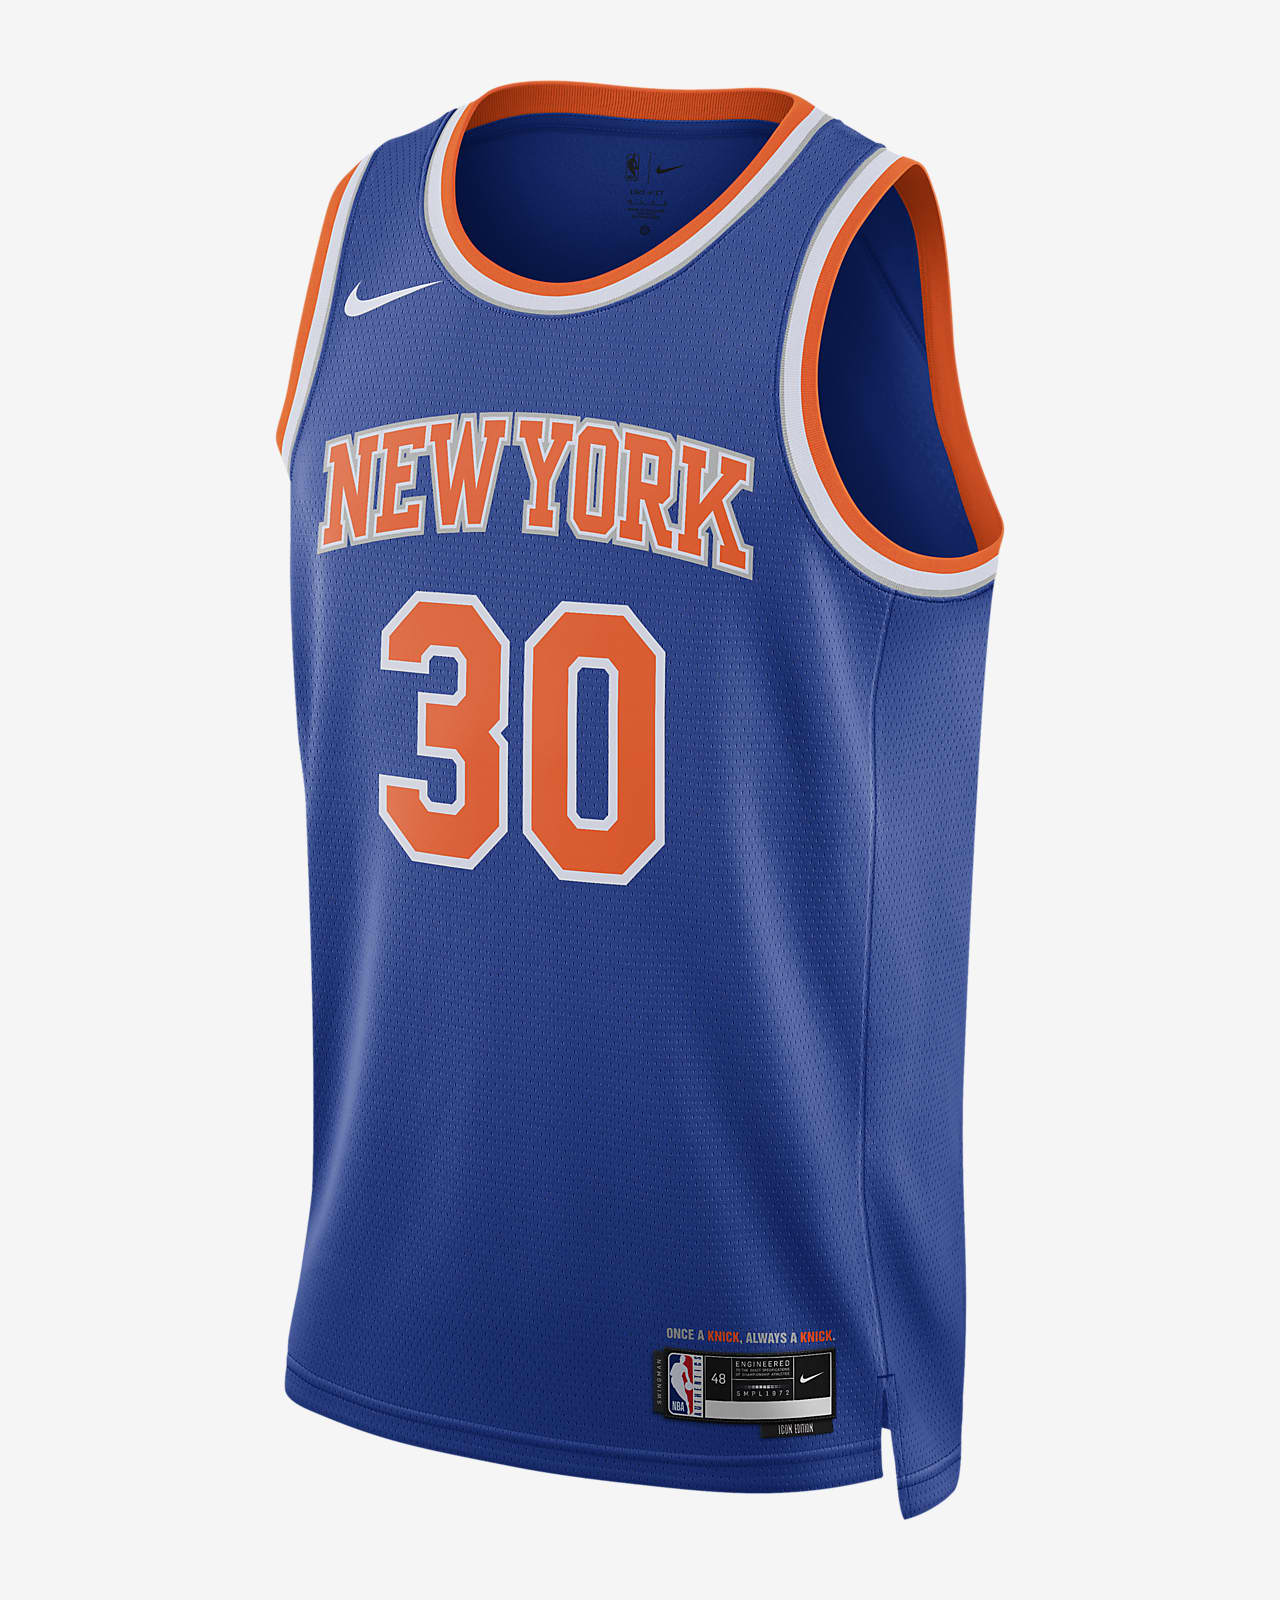 X 上的 DAVIINCI：「Statement Edition concept for @nyknicks. Reintroducing  historical brand elements in modern style to create an orange look that's  both bold and balanced. #NewYorkForever #NYWeHere #NewYork #NYC #Knicks  #NBA #NBAPlayoff